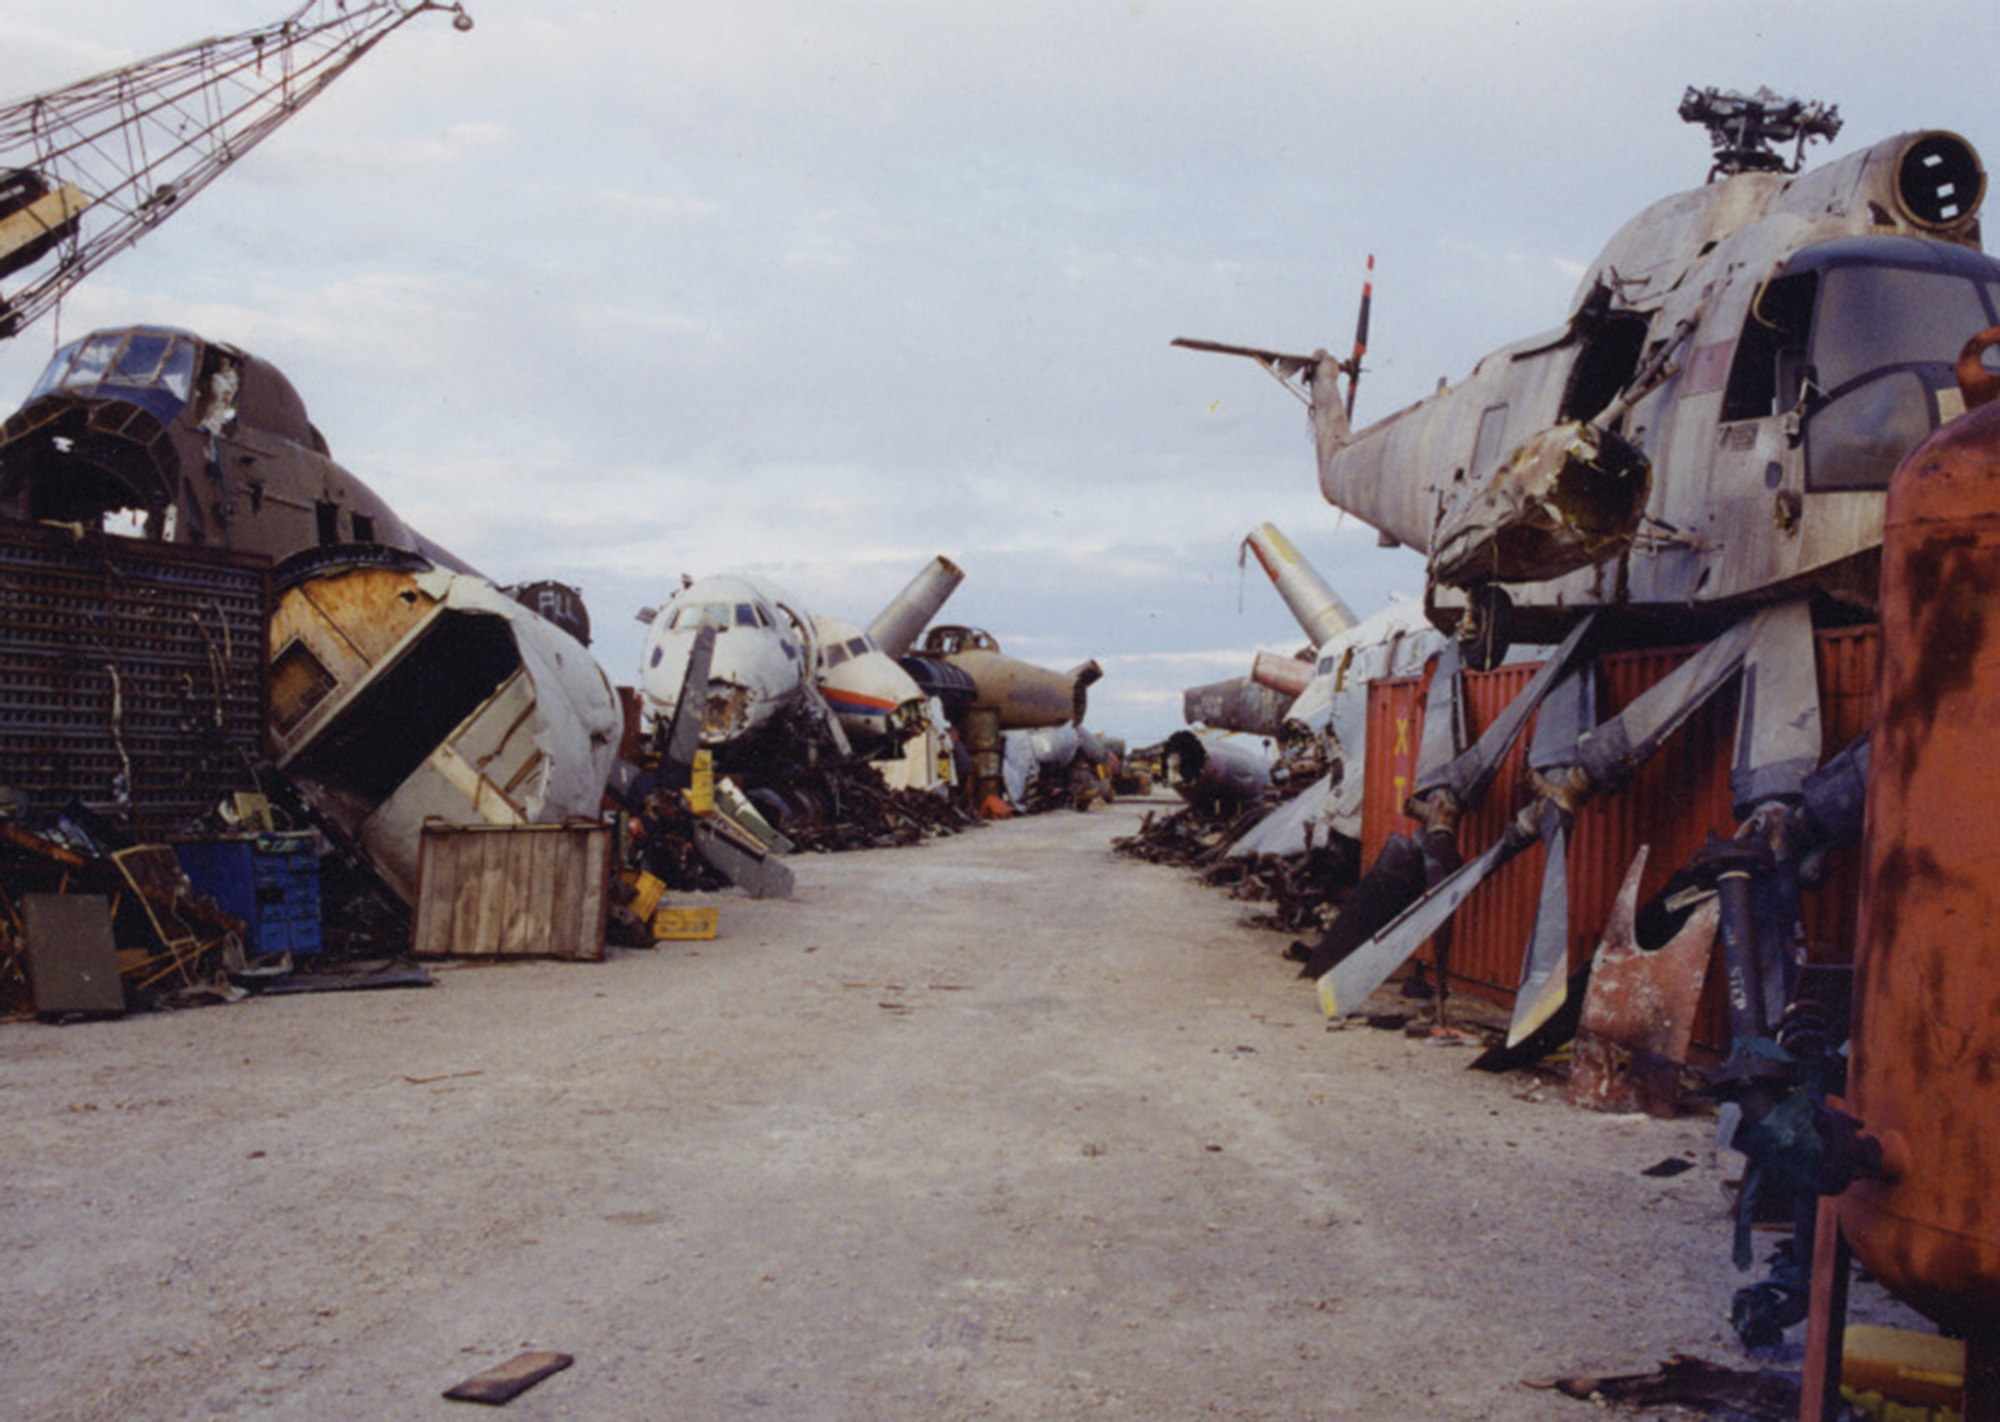 A photograph of discarded “Con Air” film prop airplanes.